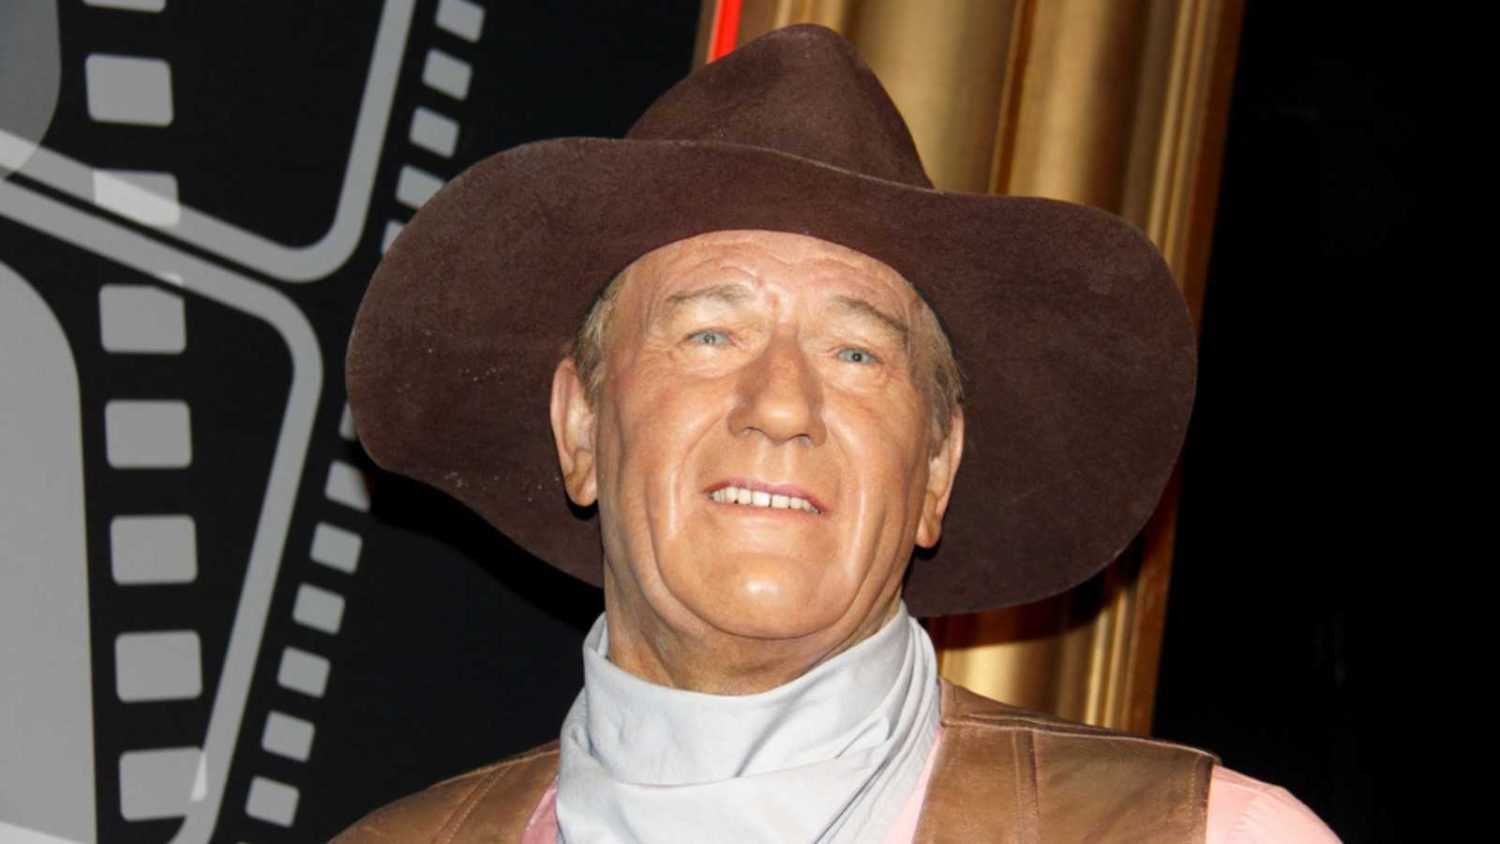 London, - United Kingdom, 08, July 2014. Madame Tussauds in London. Waxwork statue of John Wayne. Created by Madam Tussauds in 1884, Madam Tussauds is a waxwork museum and tourist attraction.